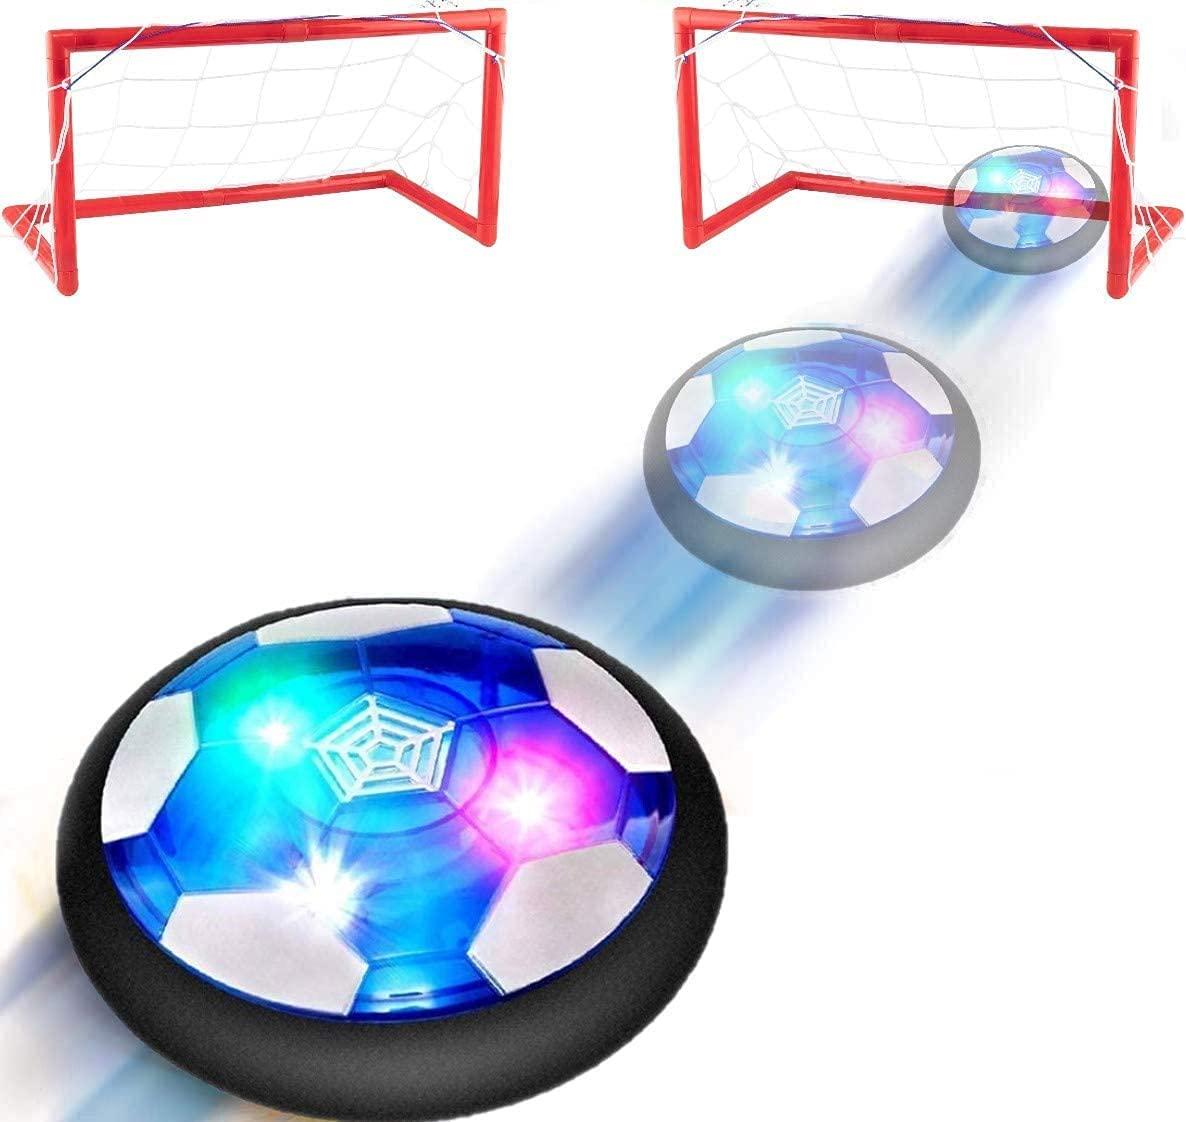 Ancesfun, Kids Toys Hover Soccer Ball Set, Rechargeable Soccer Ball with LED Lights and Safe Foam Bumper, Air Power Soccer Hover Ball with 2 Goals for 3 4 5 6 7 8-12 Years Old Boy Girl Indoor/Outdoor Games